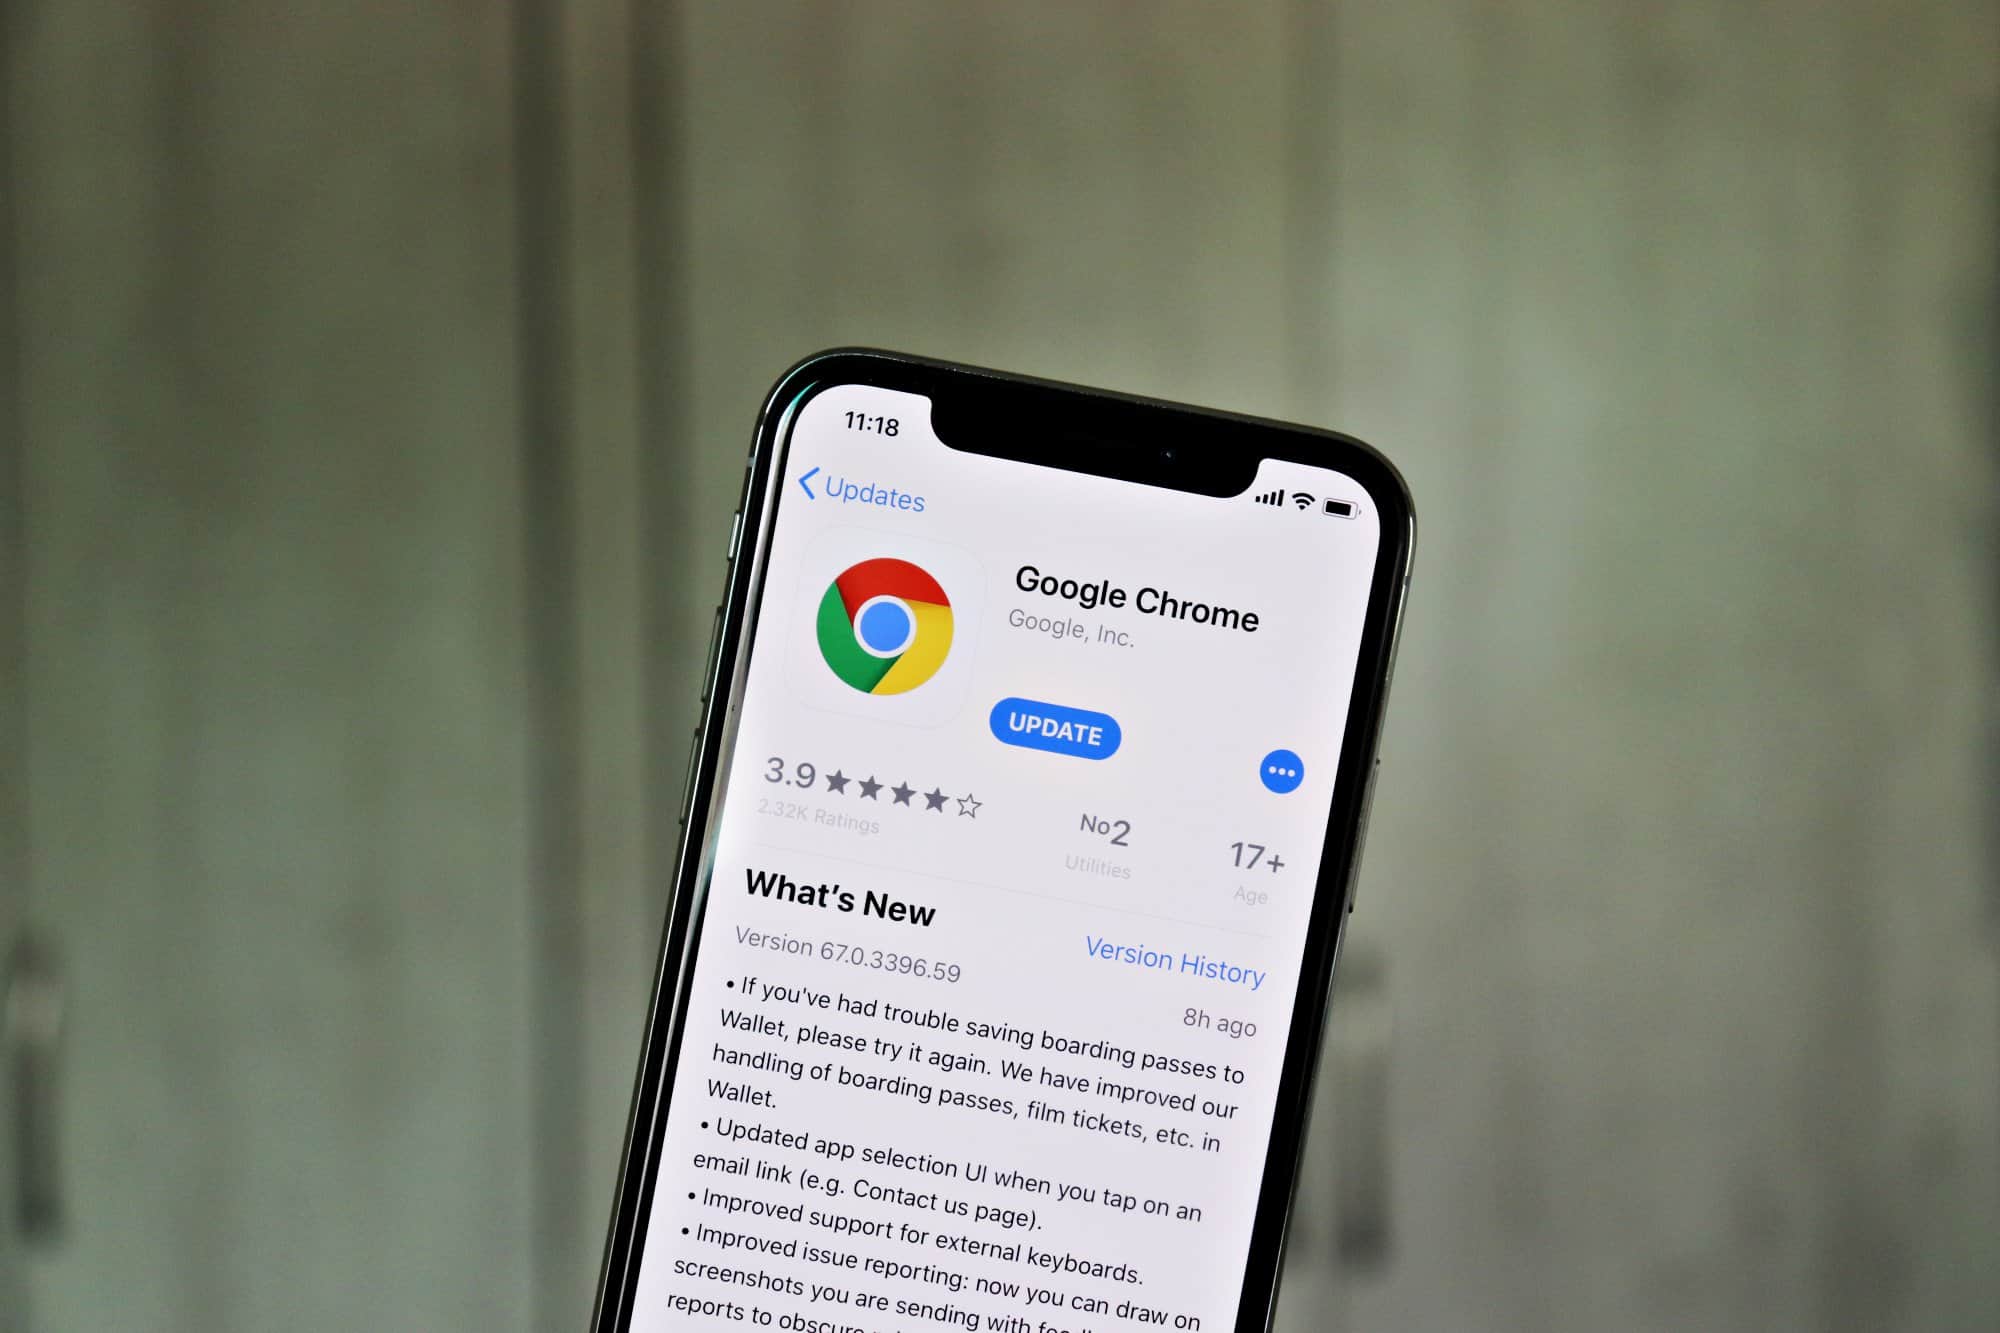 Chrome 67 update for iOS improves Wallet support and lets users draw on screenshots for feedback